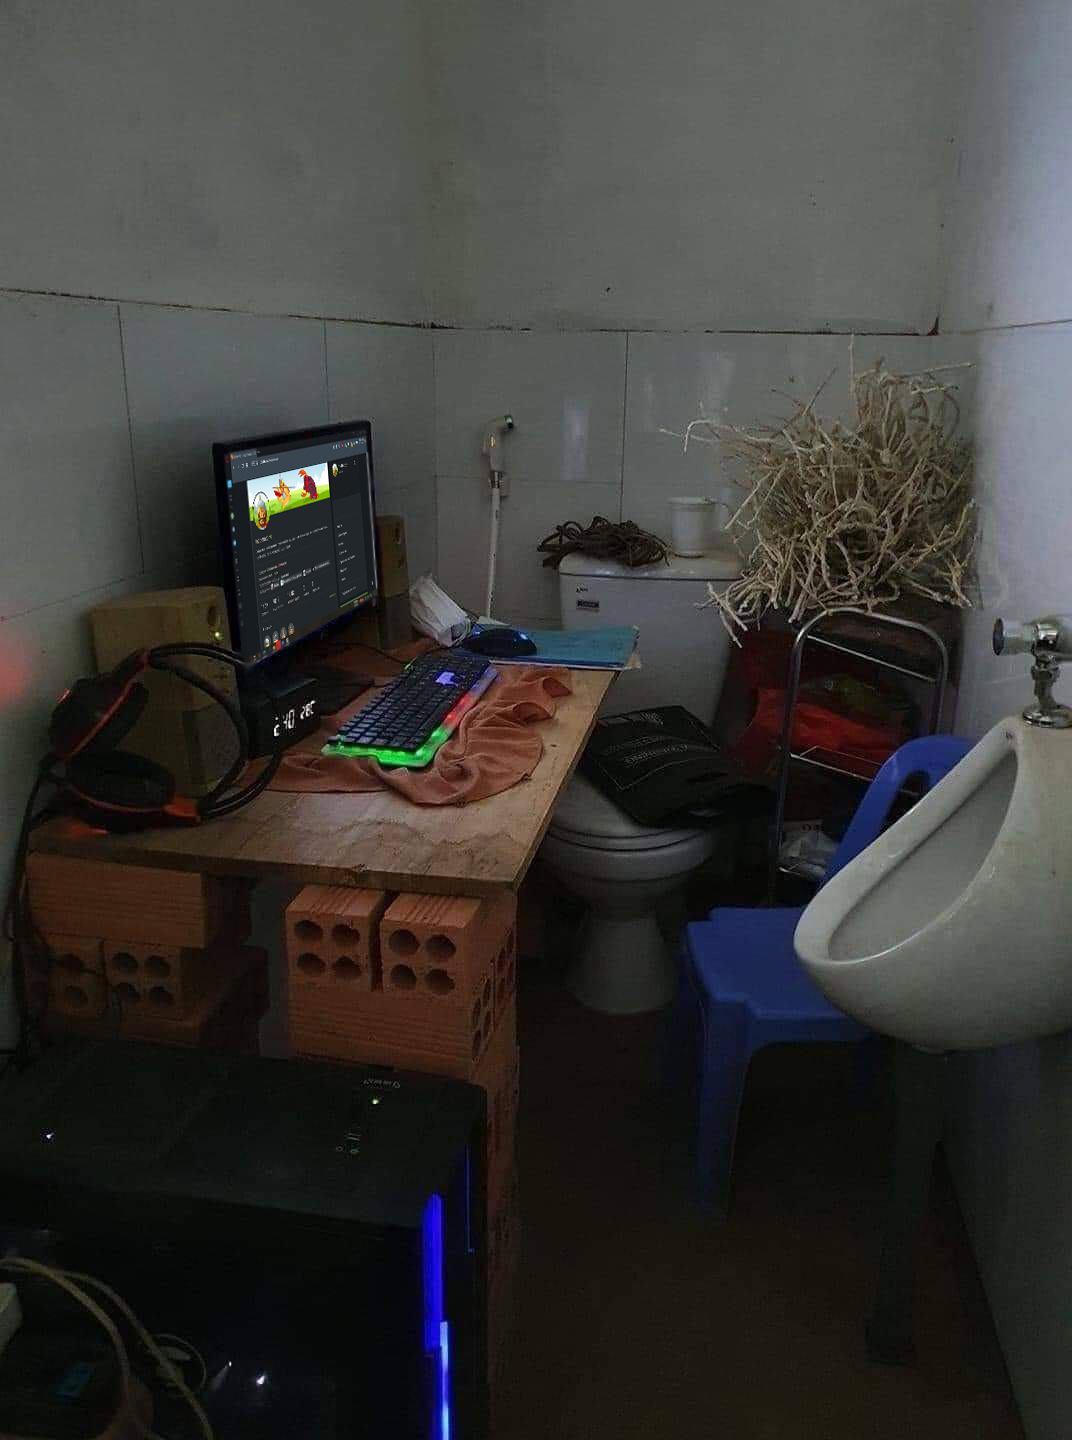 For some reason, many feel sorry for the moderators, but I think that they settled in quite comfortably: - Toilet, Computer, Urinal, Toilet, Convenience, Workplace, Moderator